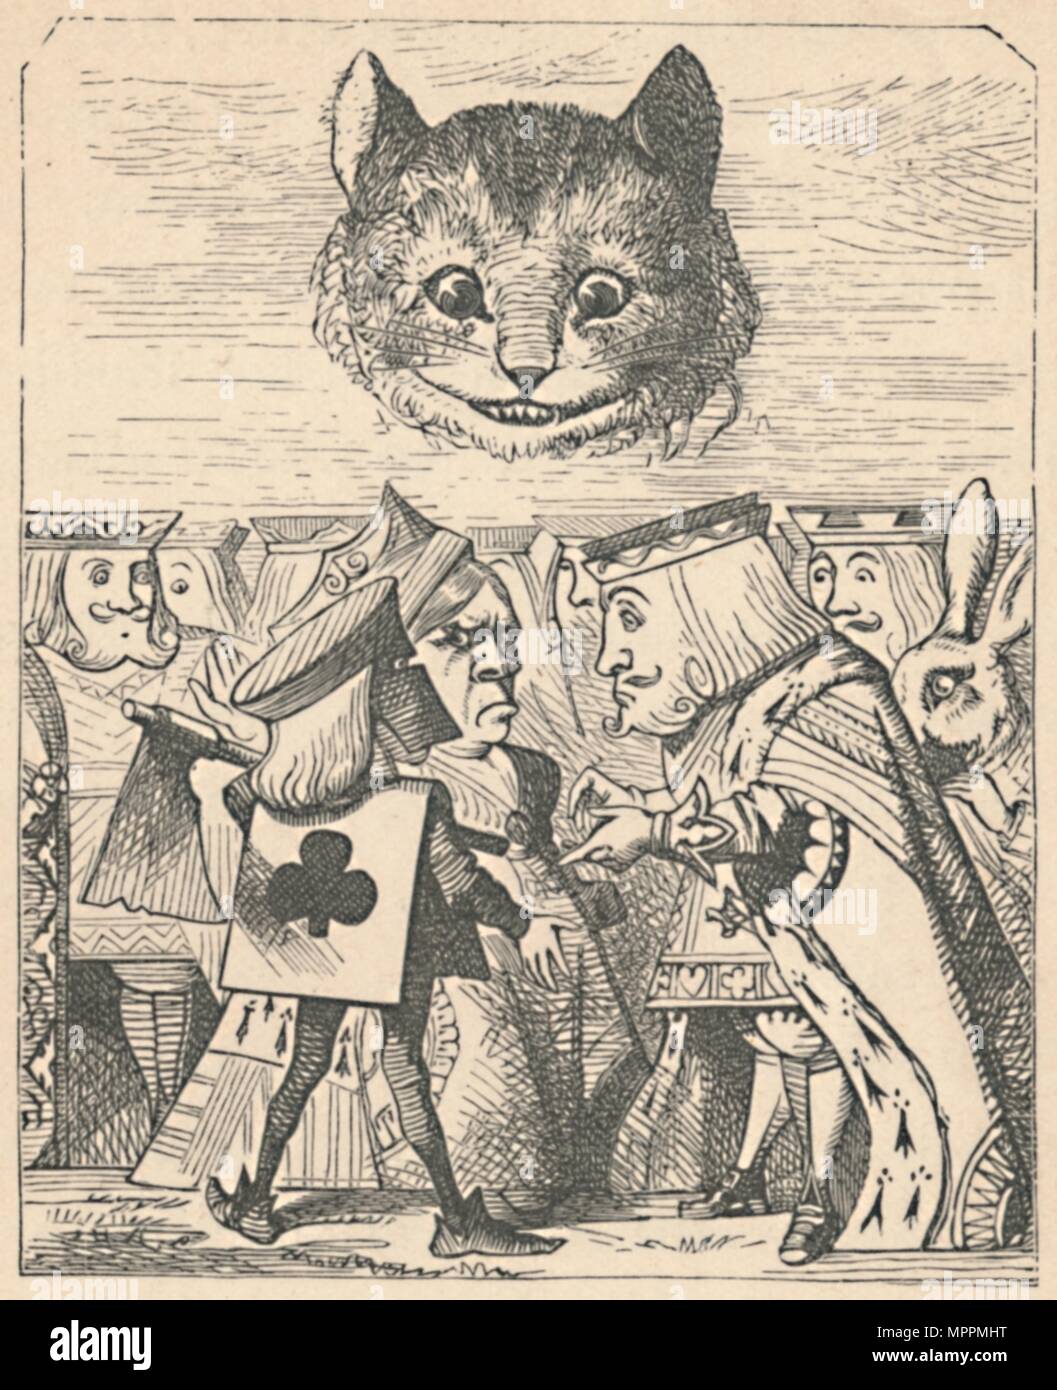 'The Cheshire Cat looking down at the Red King and Queen having an argument', 1889. Artist: John Tenniel. Stock Photo